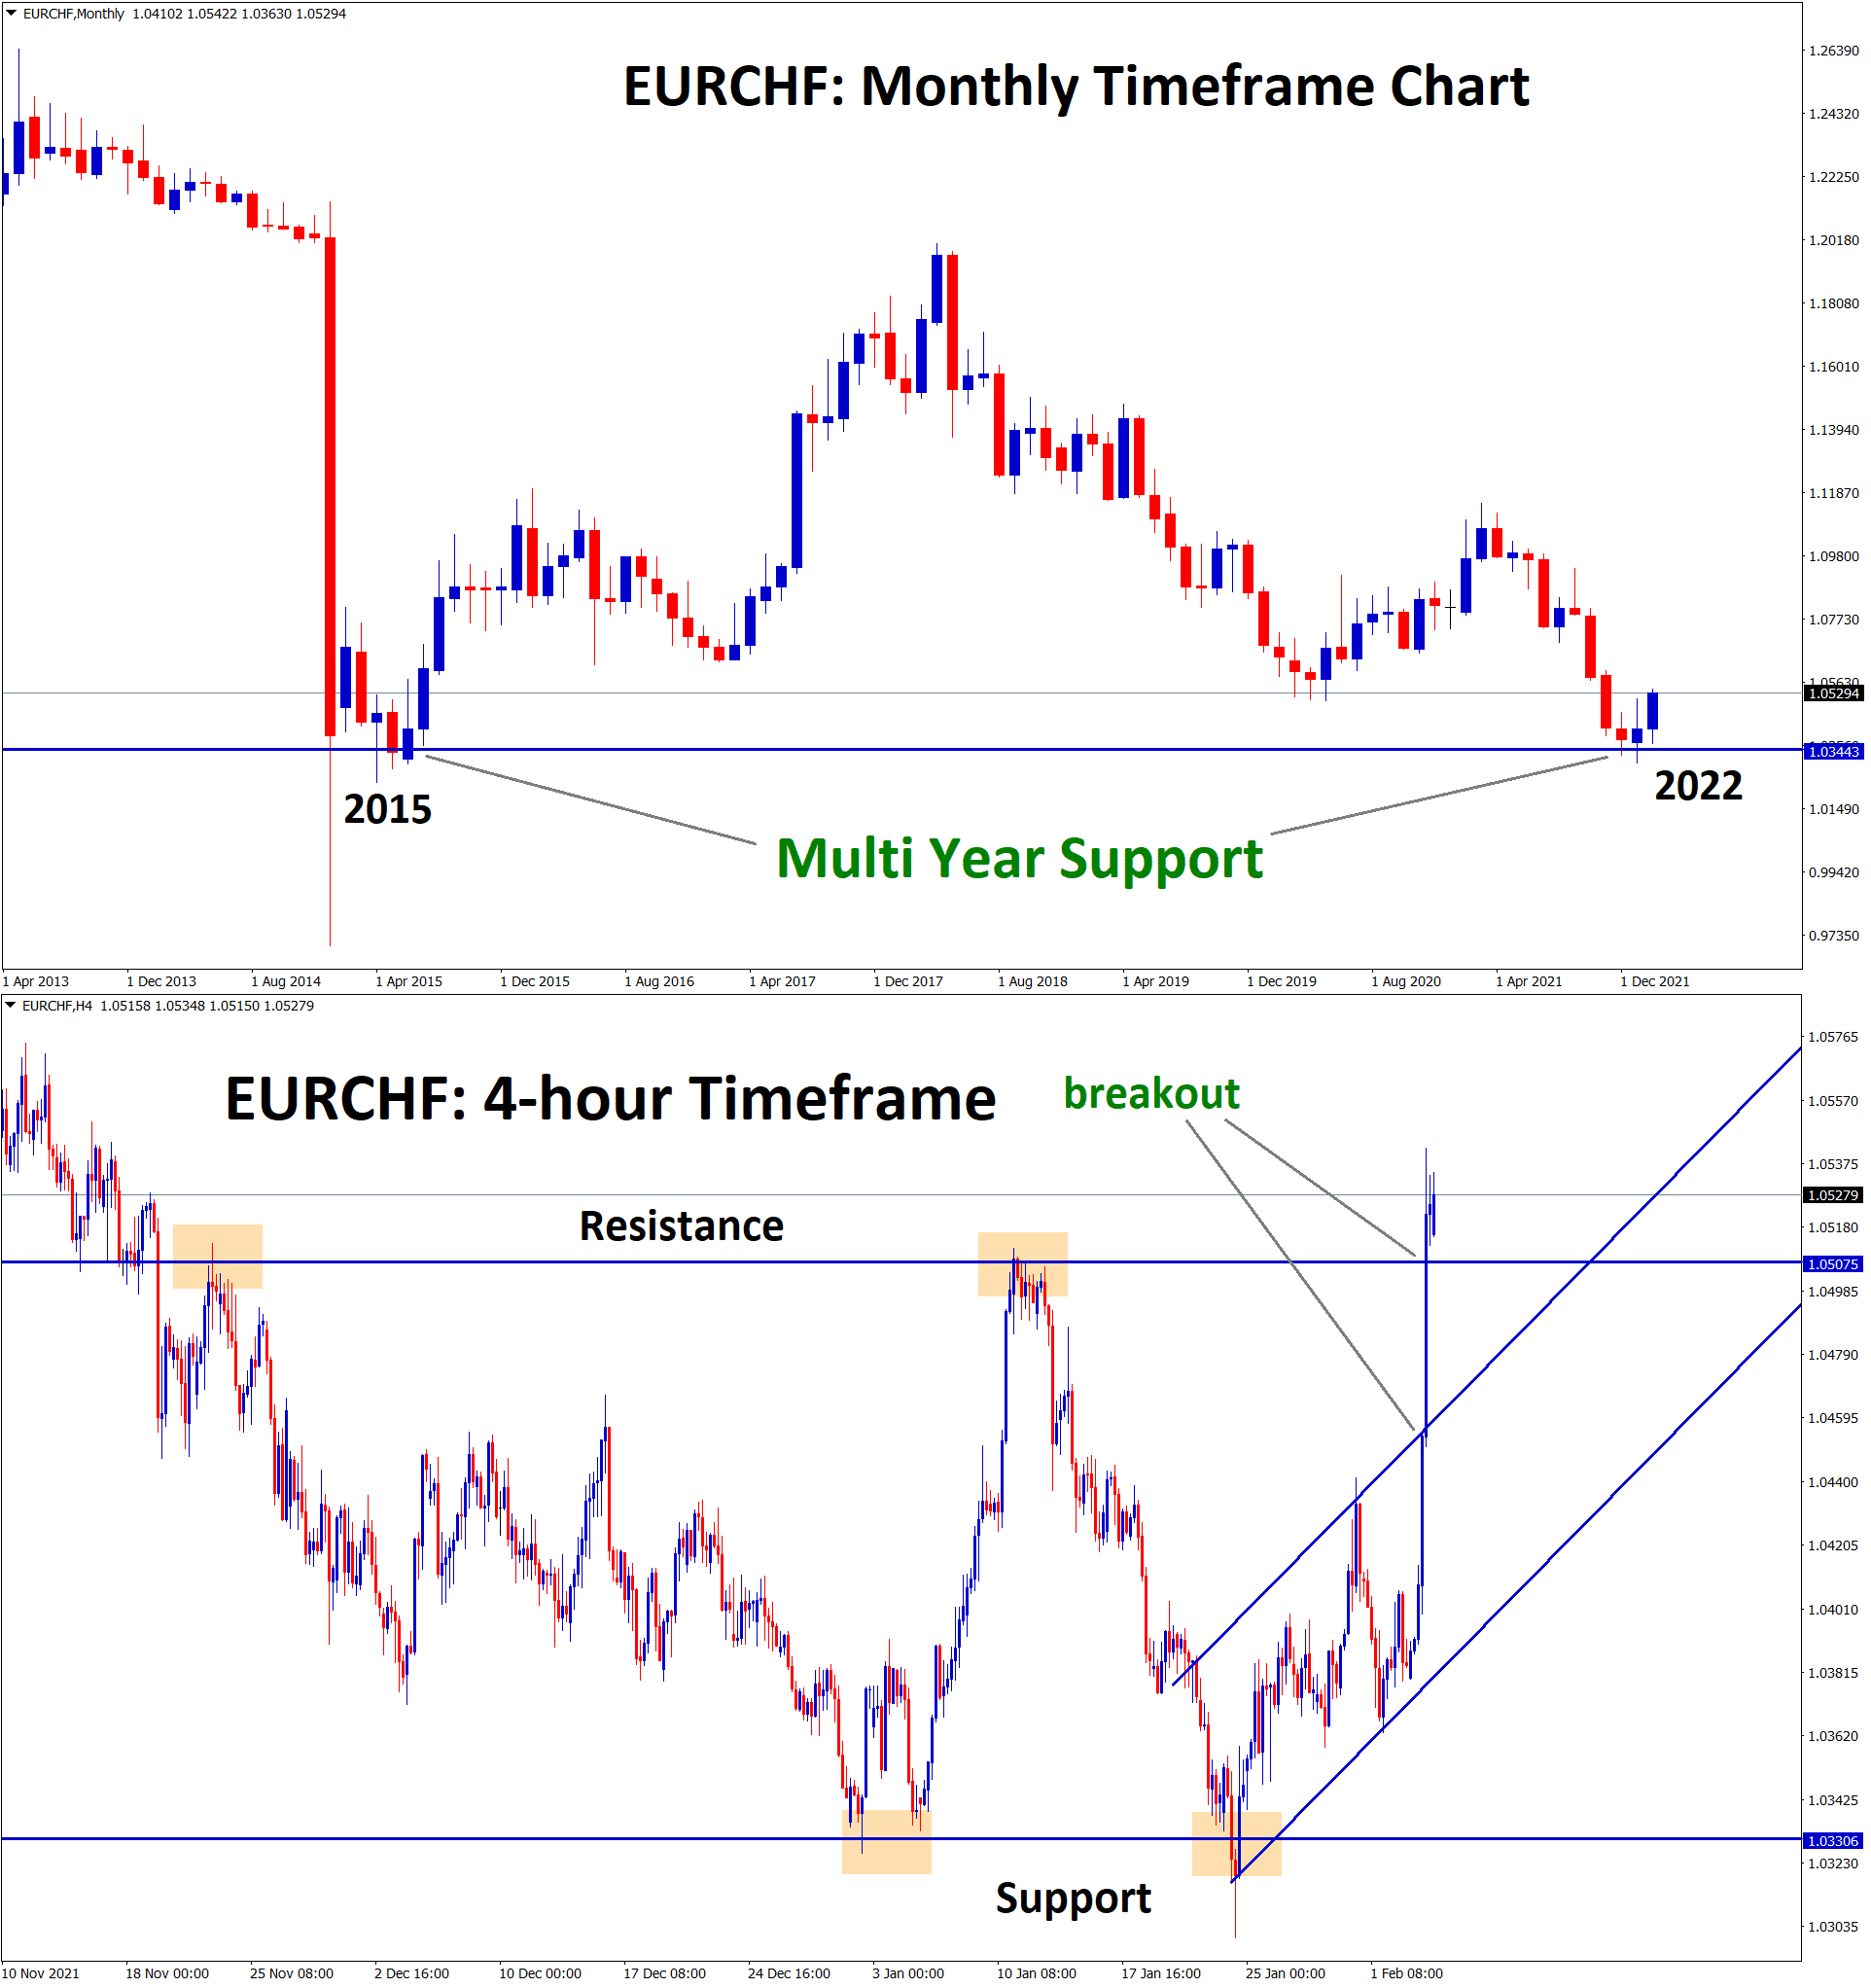 EURCHF is rebounding from the Multi year major support area and broken the recent resistance zones